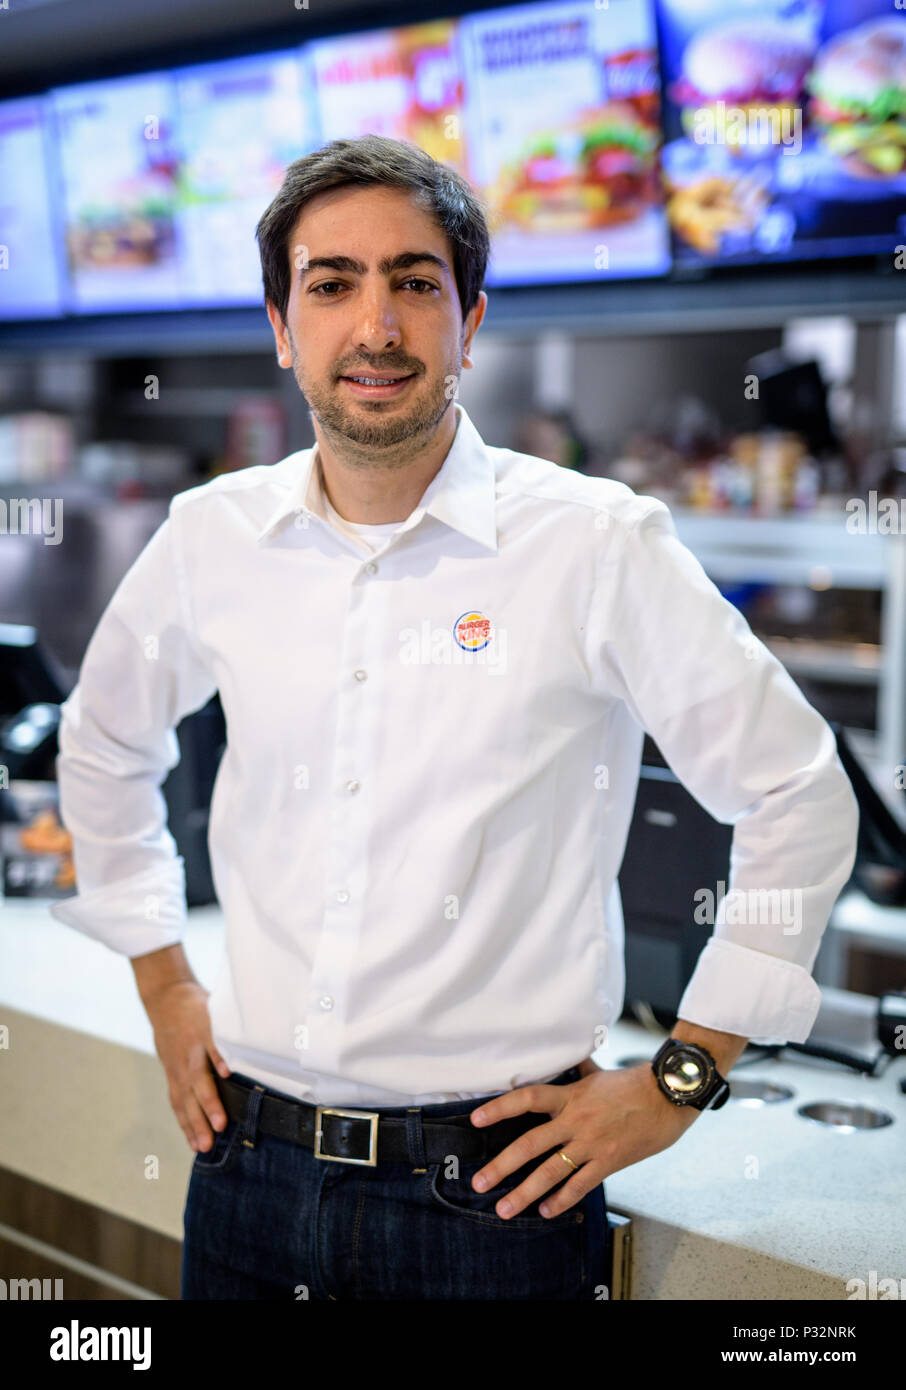 15 June 2018, Germany, Munich: Carlos Eduardo Baron, Burger King's manager in Germany, during an interview. Photo: Matthias Balk/dpa Stock Photo